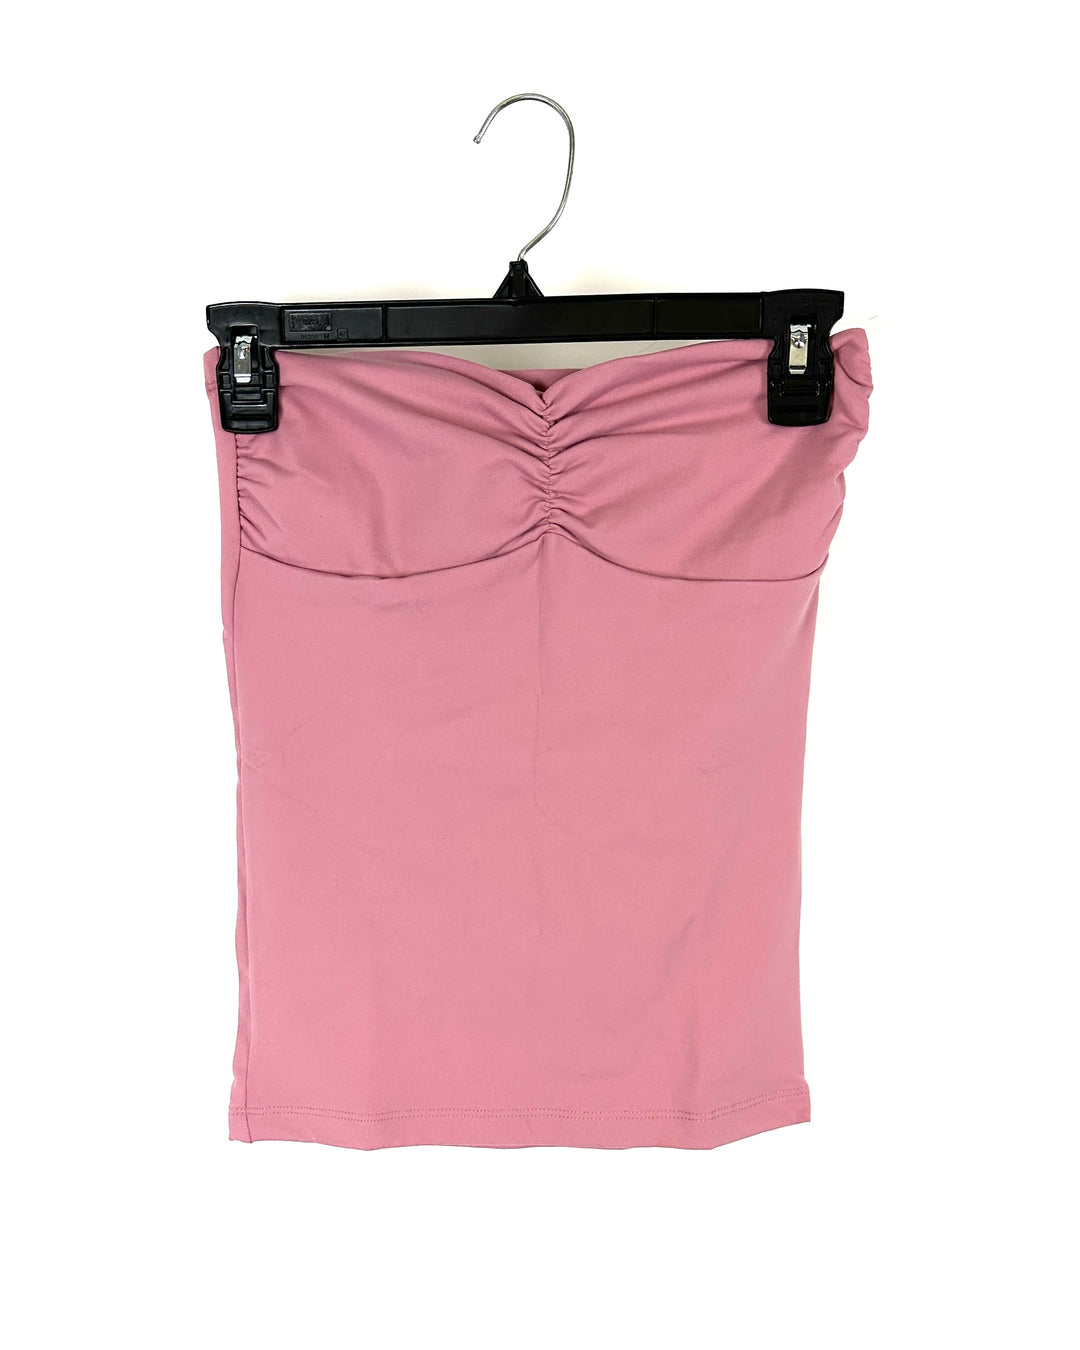 Pink Tube Top - Extra Small, Small and Medium